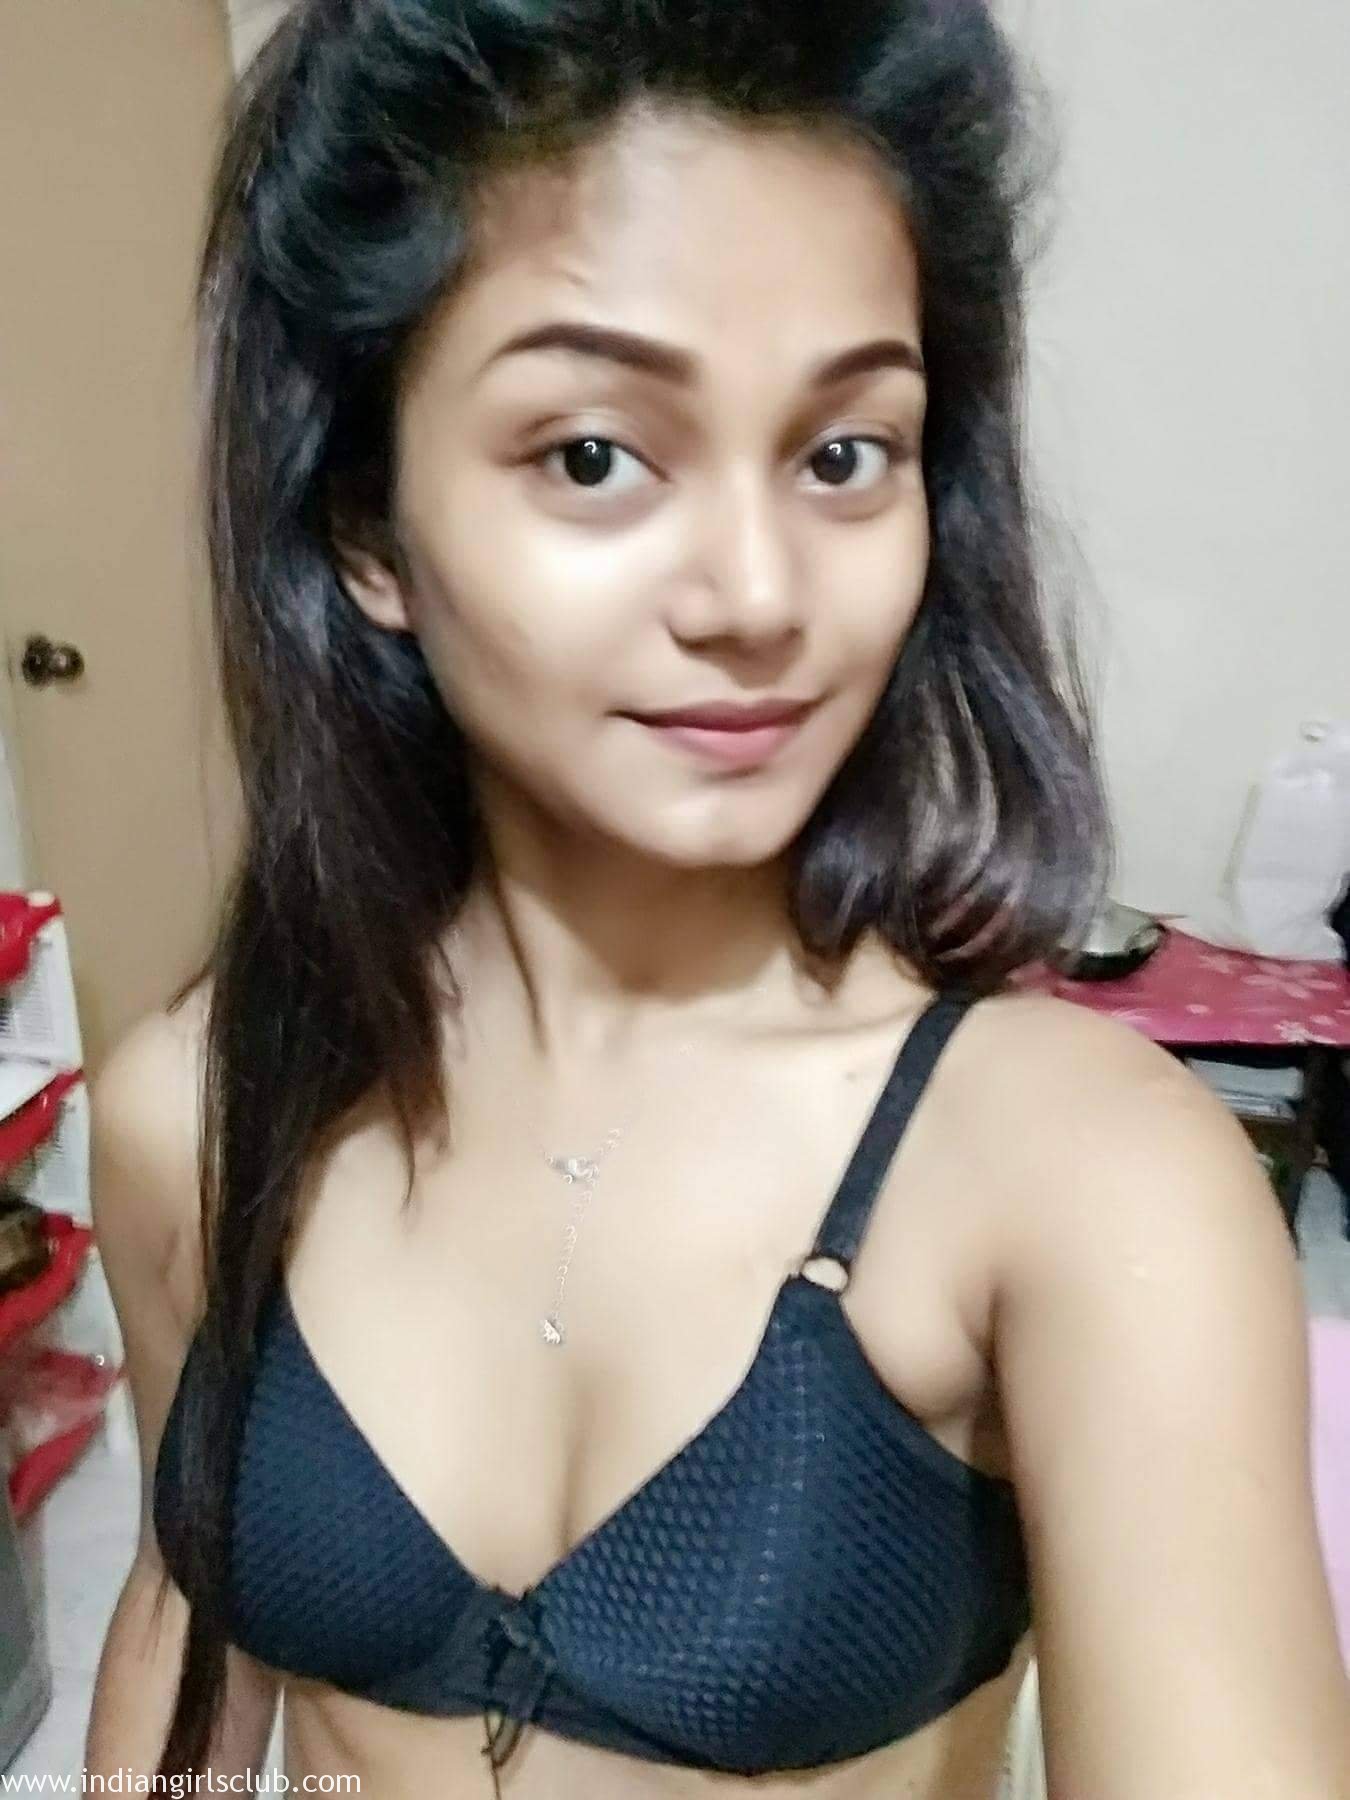 Bra Sex Indian College - juicy_indian_teen_homemade_porn_16 - Indian Girls Club - Nude Indian Girls  & Hot Sexy Indian Babes